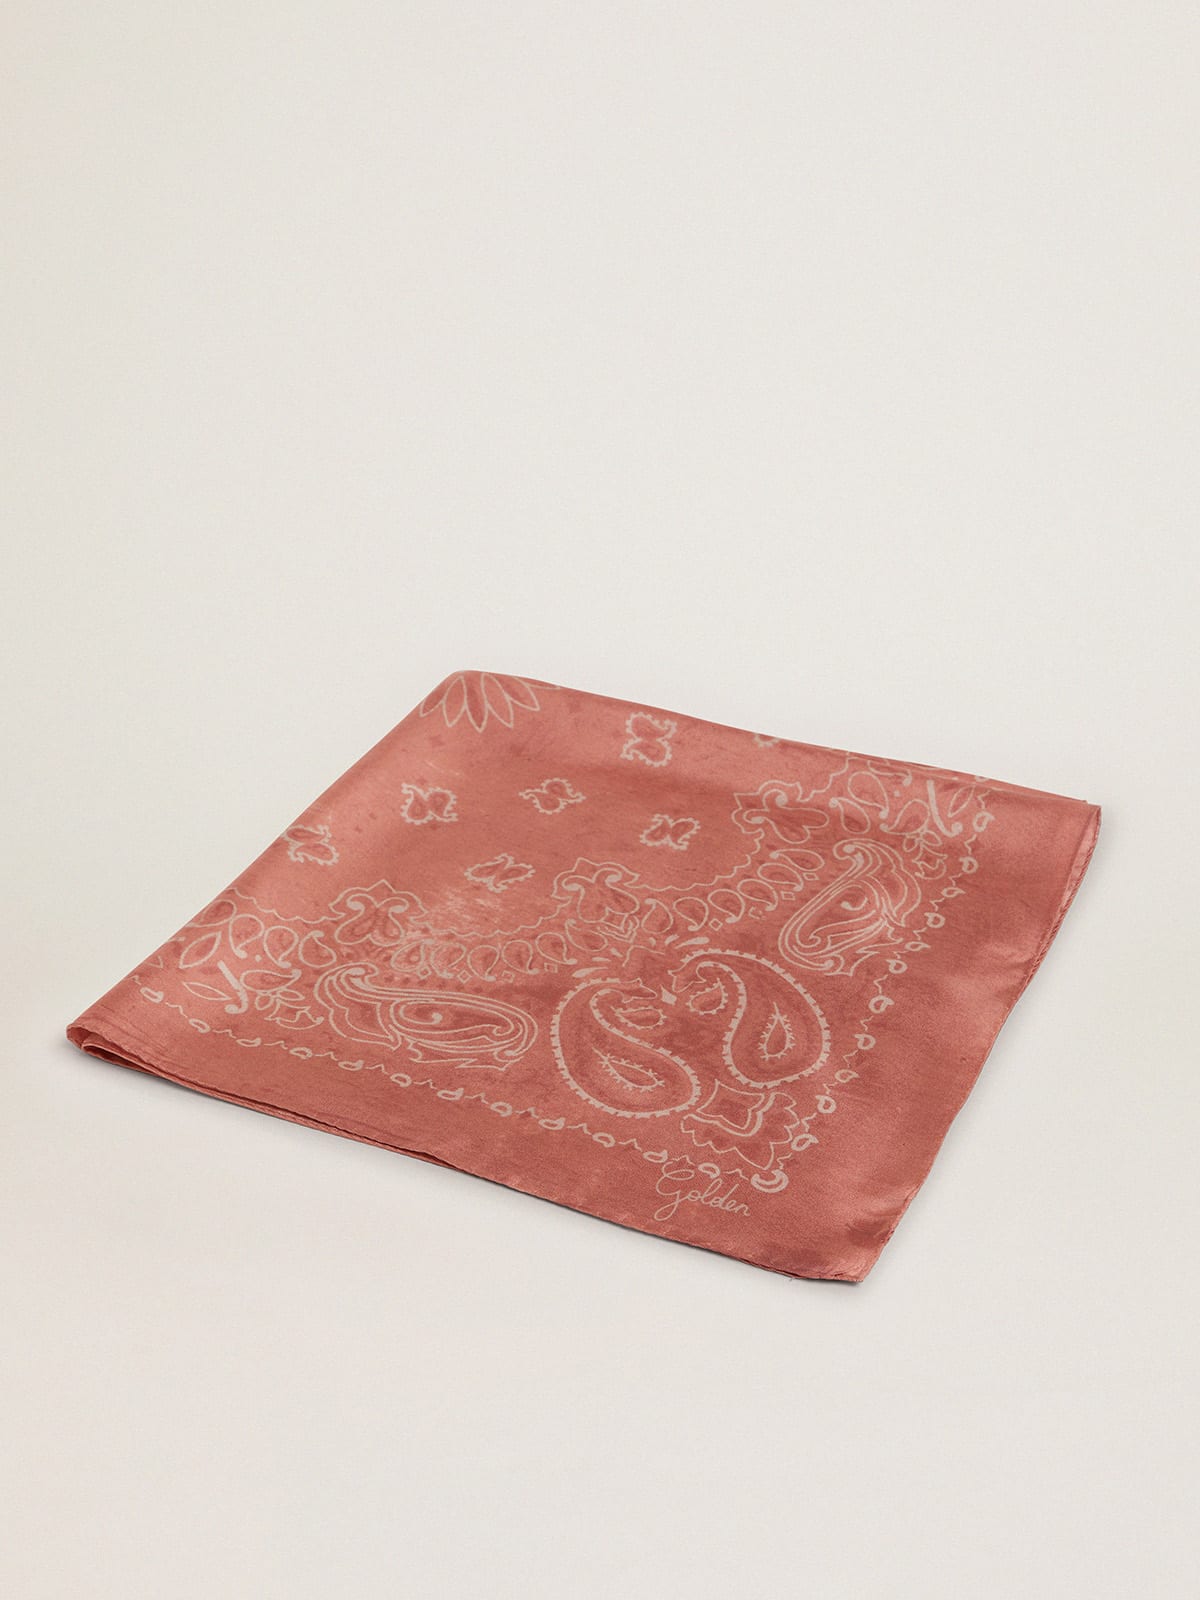 Golden Goose - Old rose scarf with paisley print in 